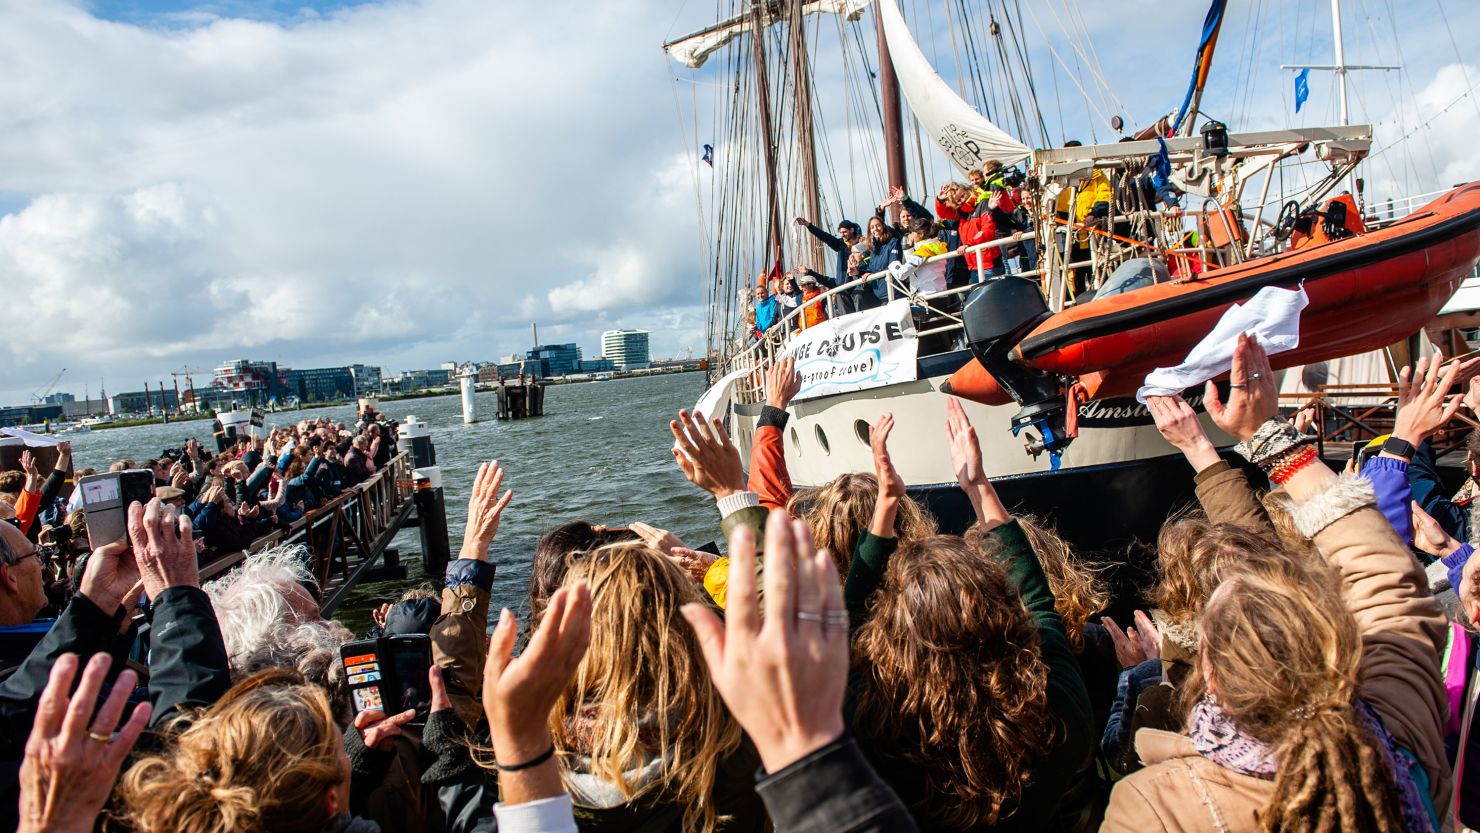 The activists set off from Amsterdam on October 2.